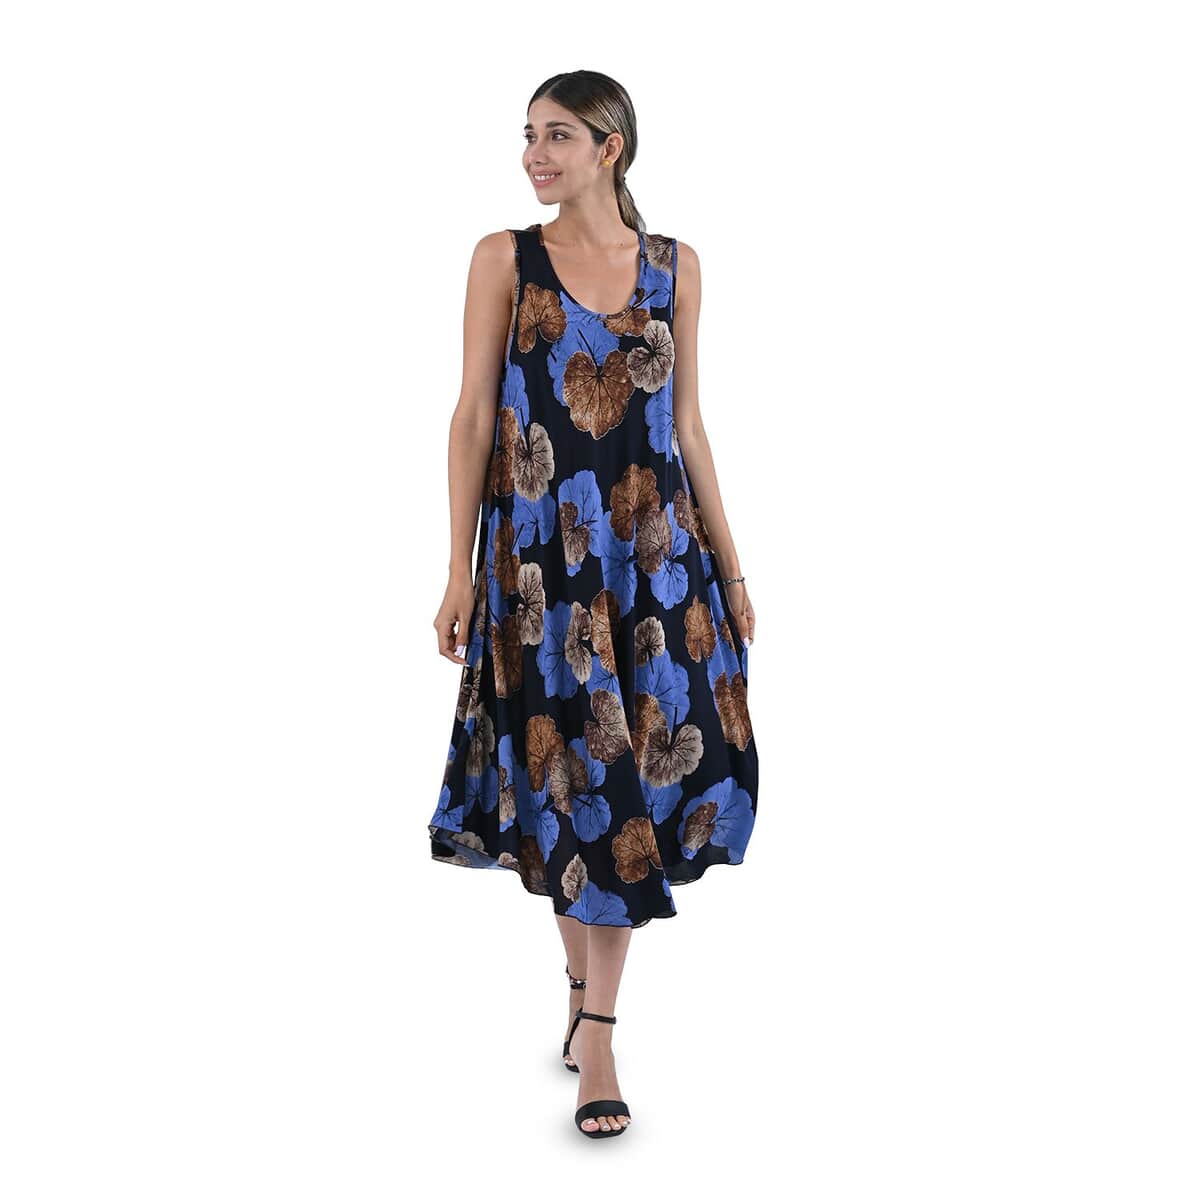 TAMSY Blue Leaf Print Sleeveless A-Line Dress - One Size Fits Most (24"x41") image number 0